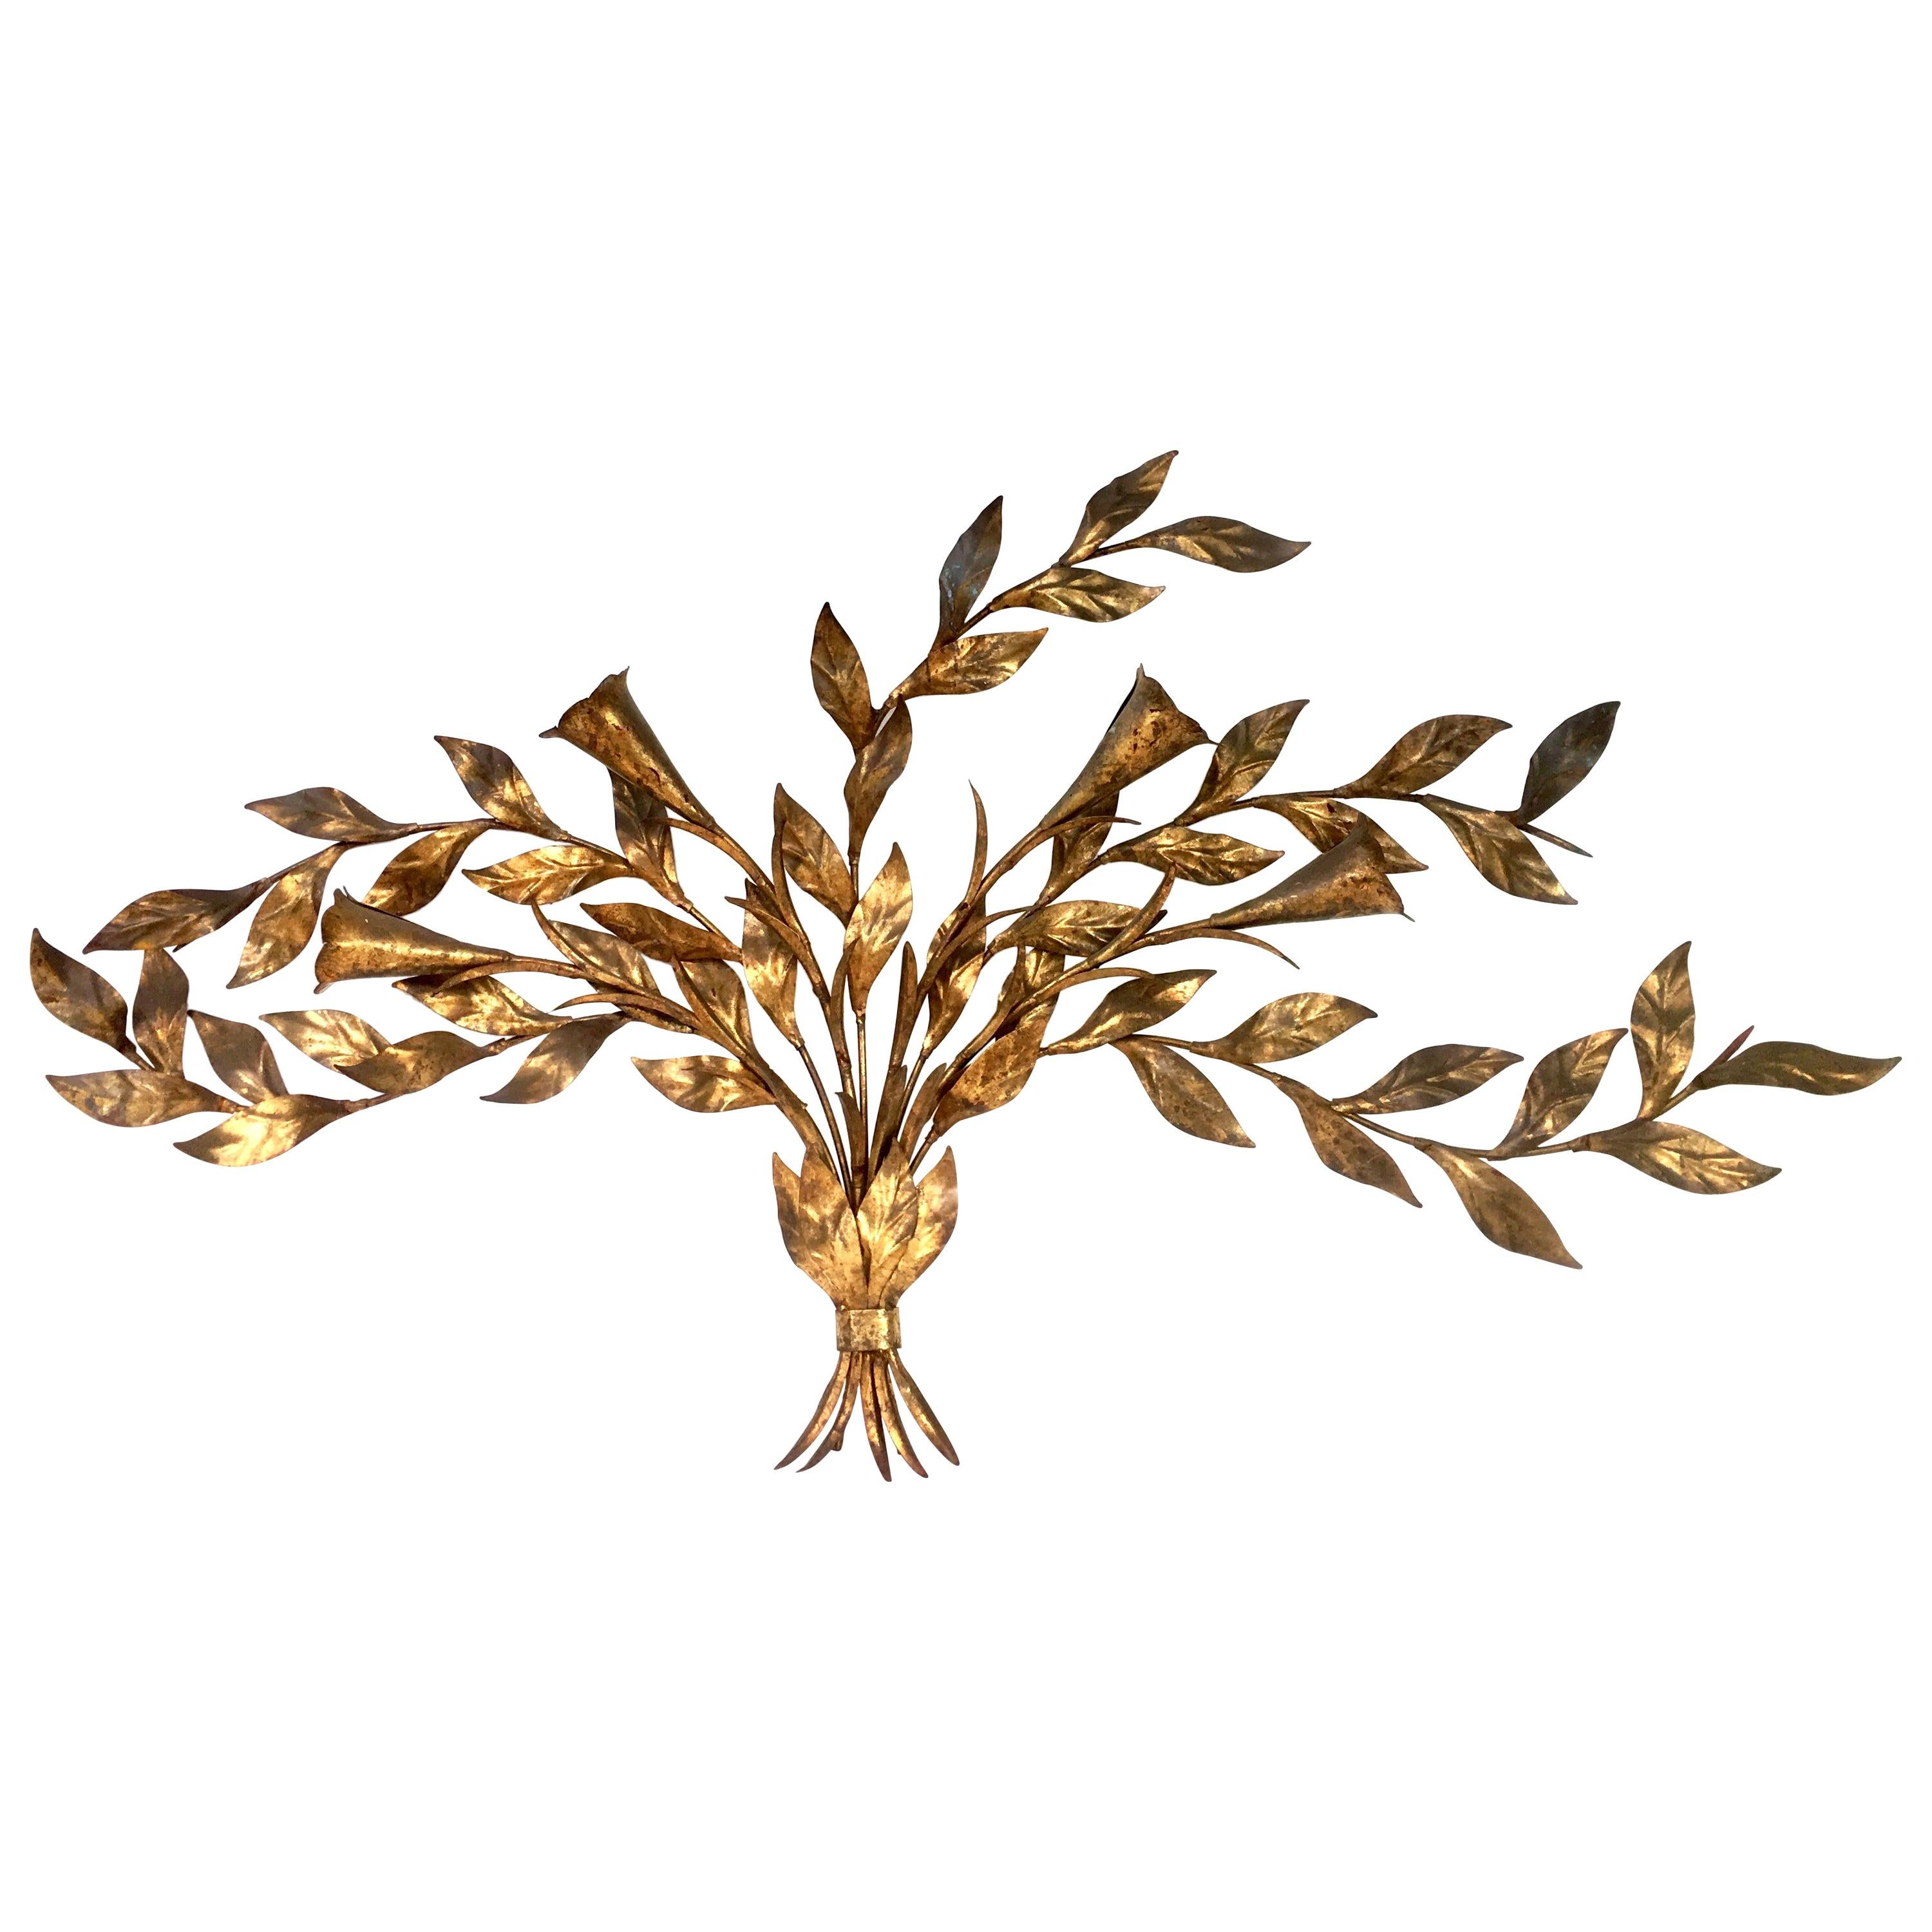 1950s Monumental Italian Gold Leaf Floral Sheaf Wall Sculpture by Florentia For Sale